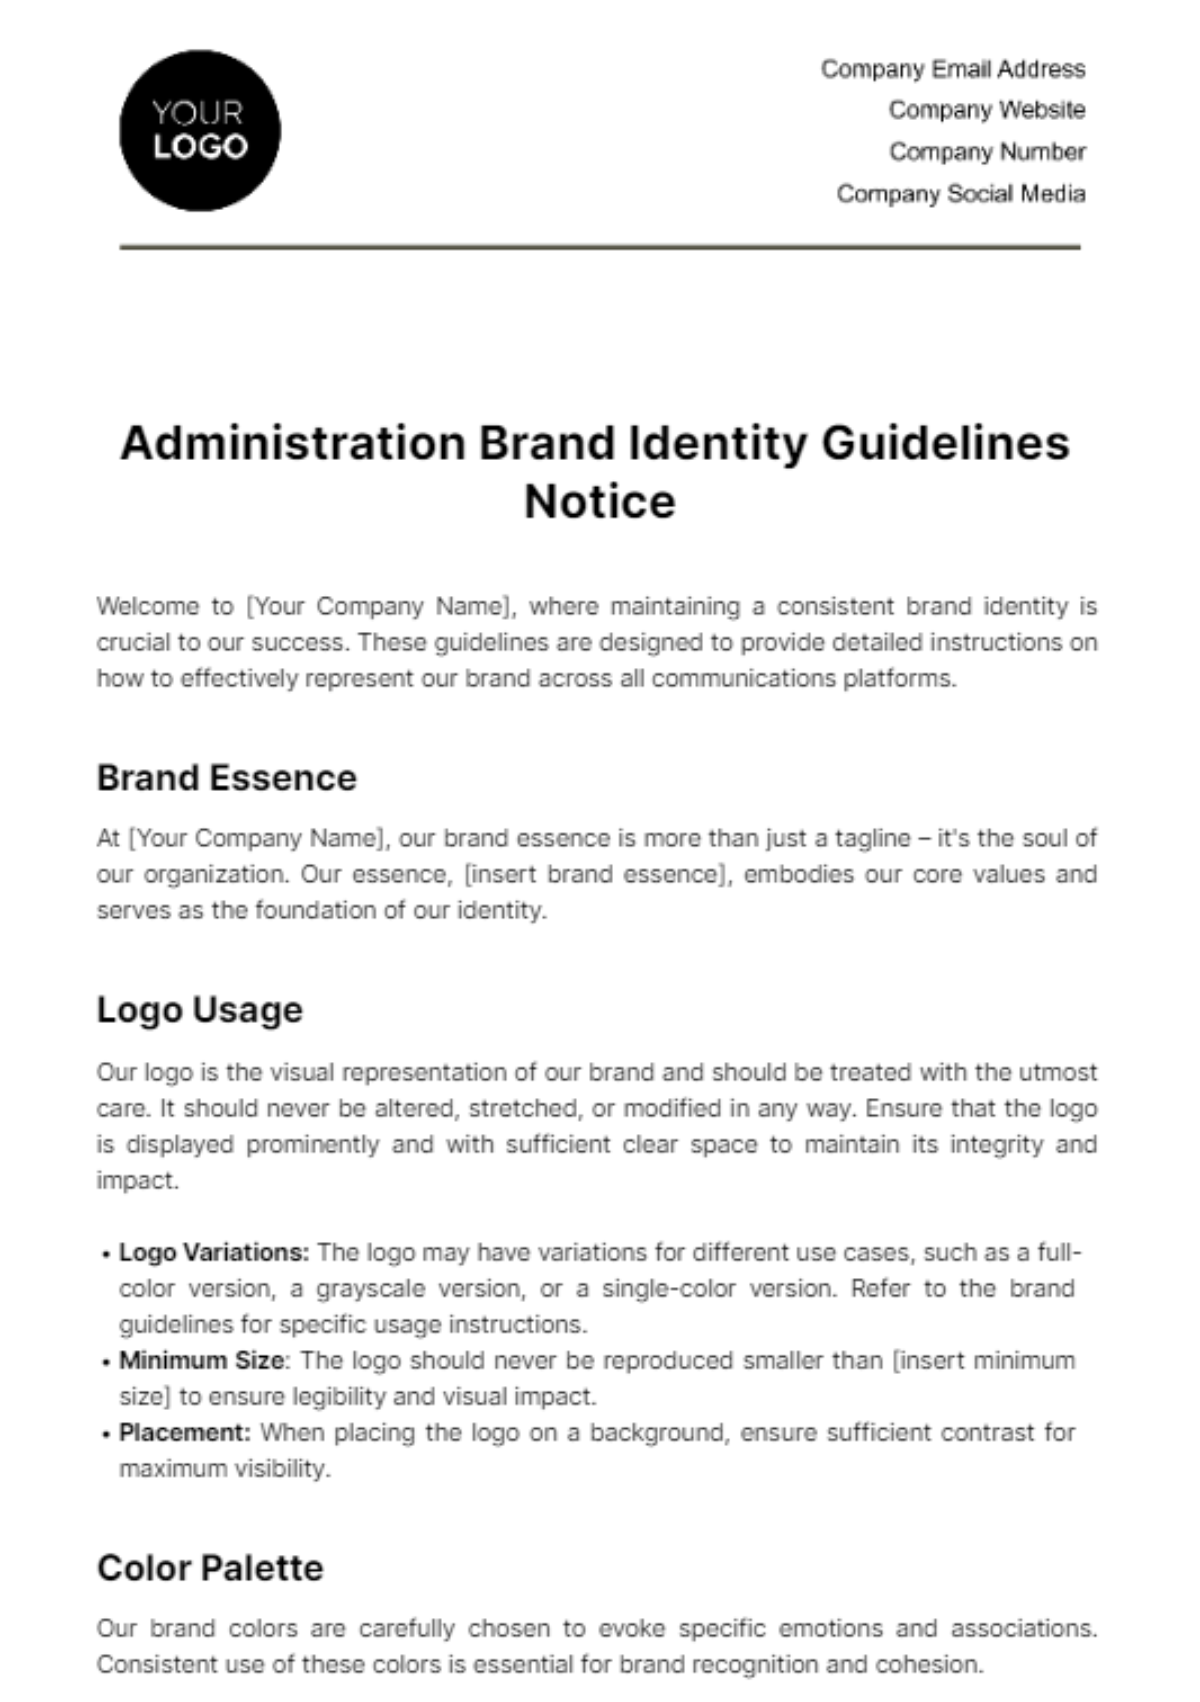 Administration Brand Identity Guidelines Notice Template